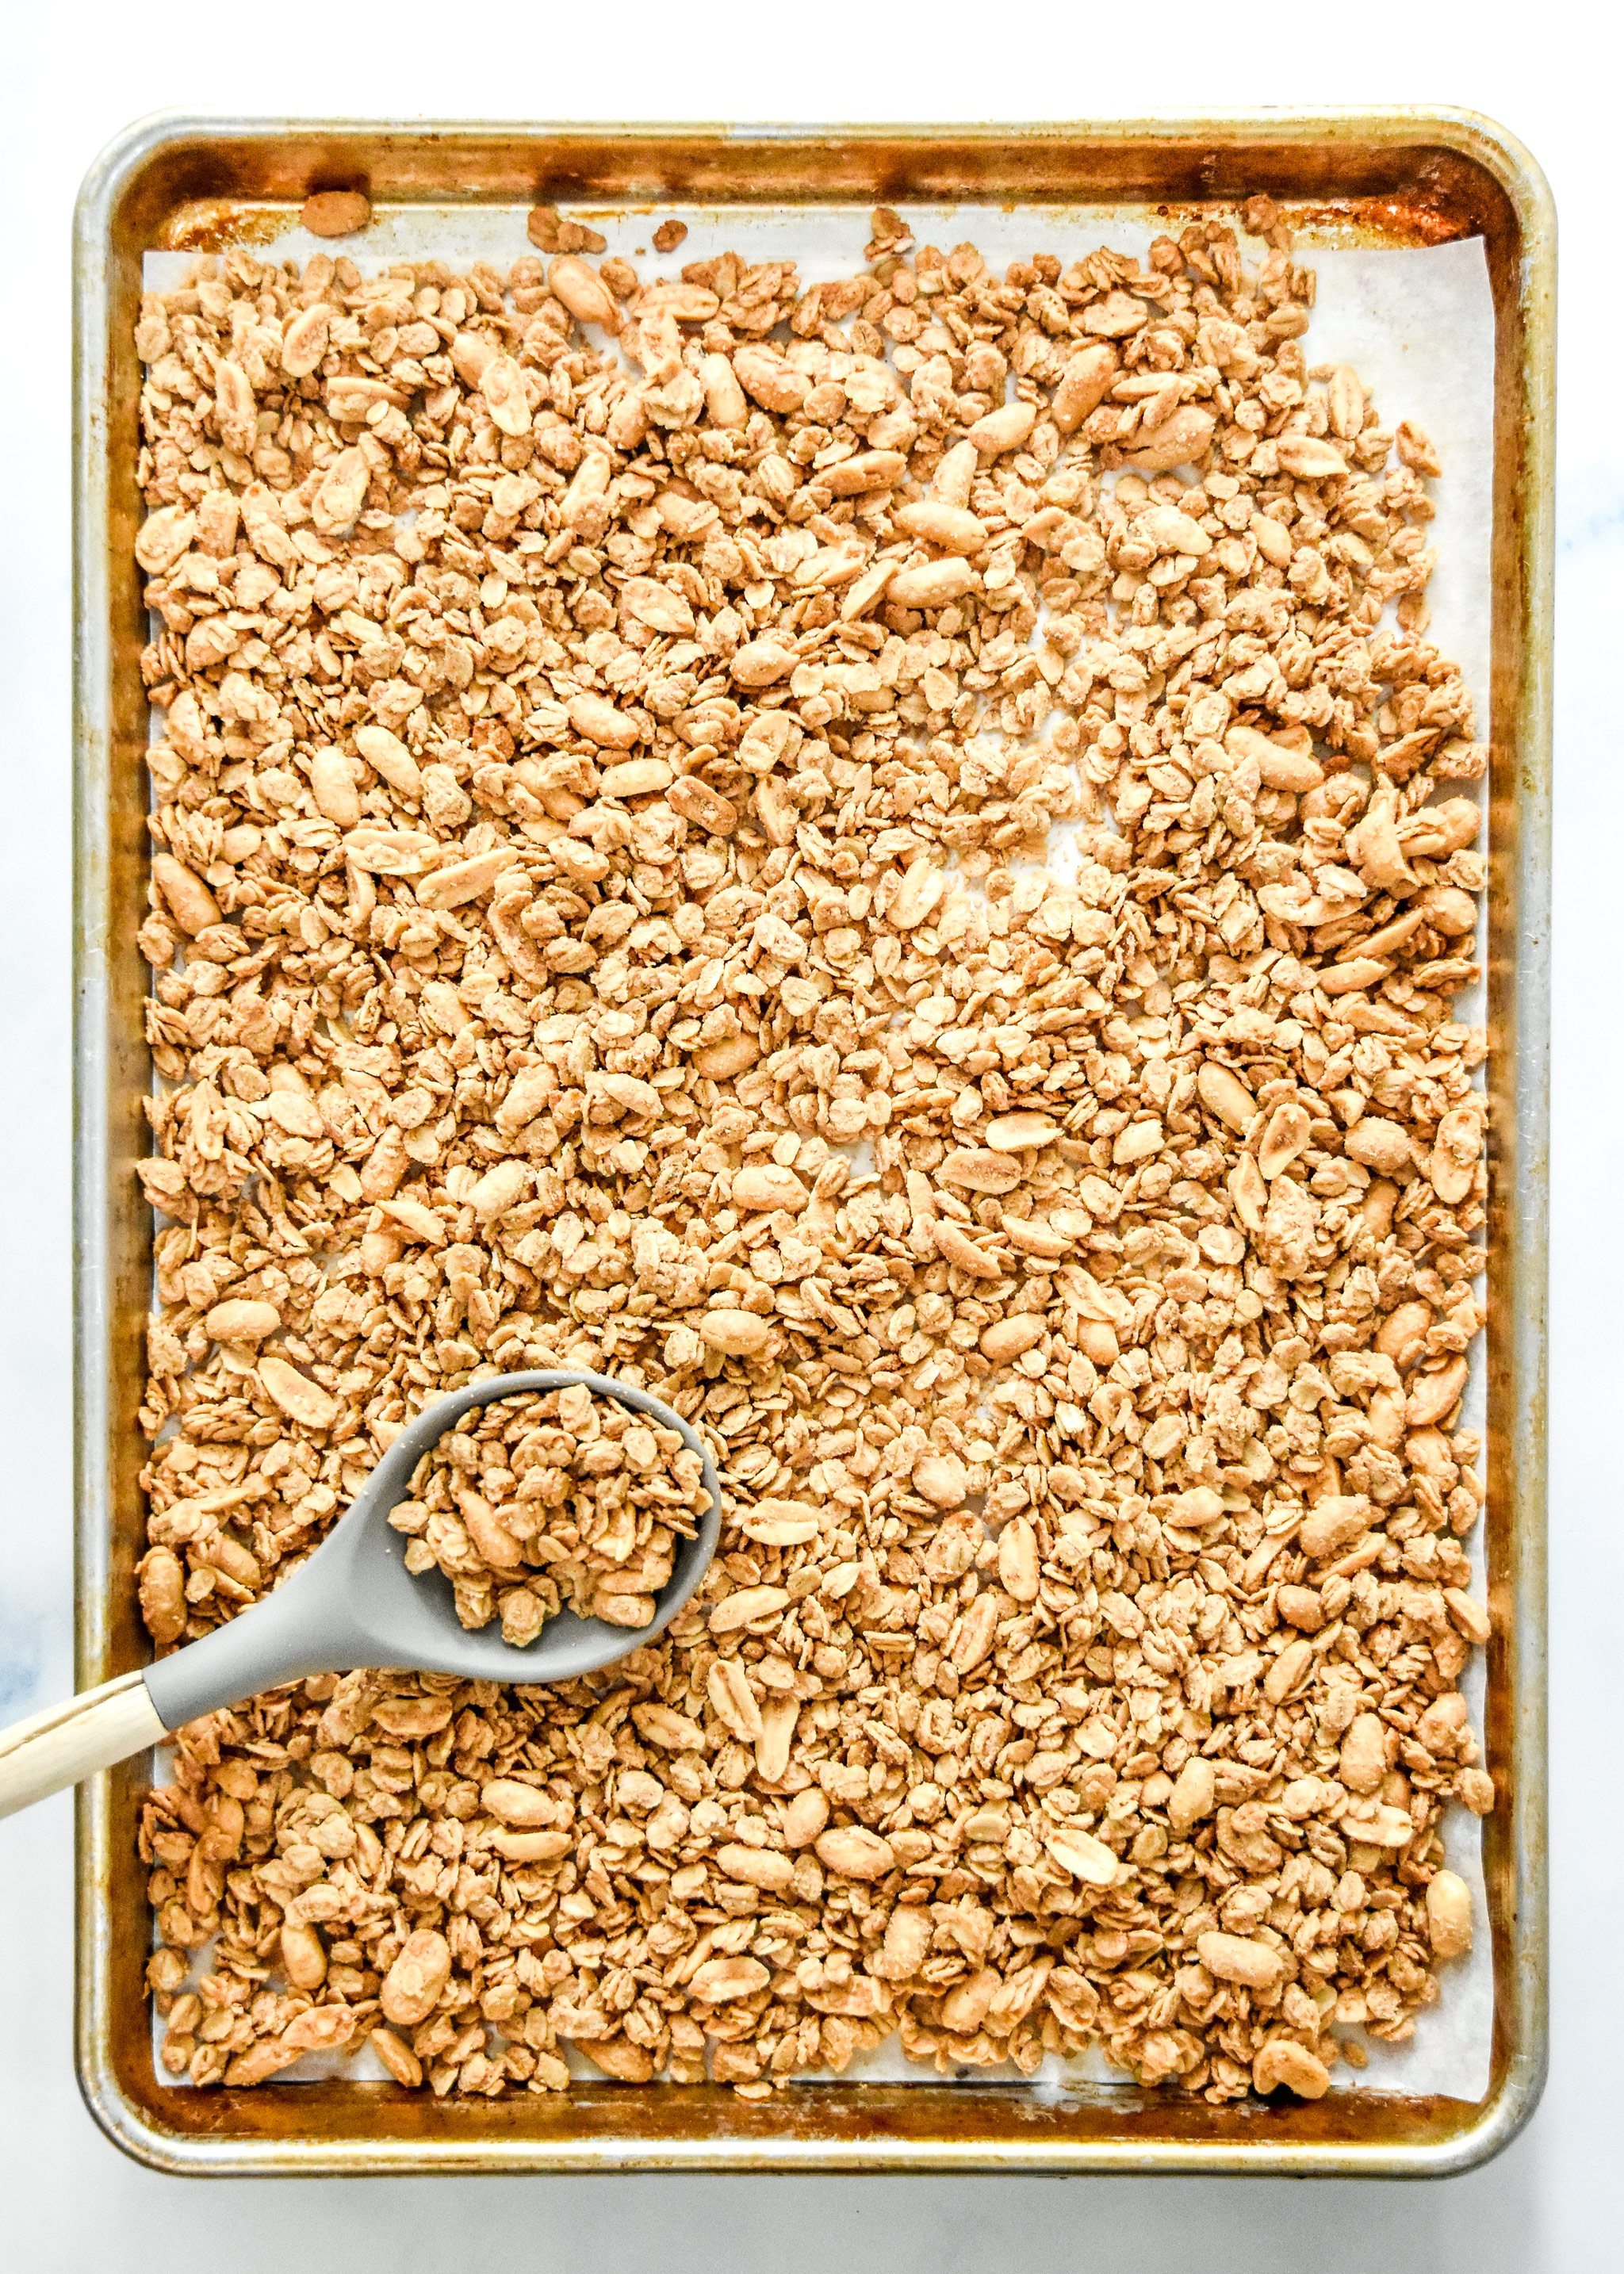 cooked peanut butter granola on a sheet pan with a spoon.